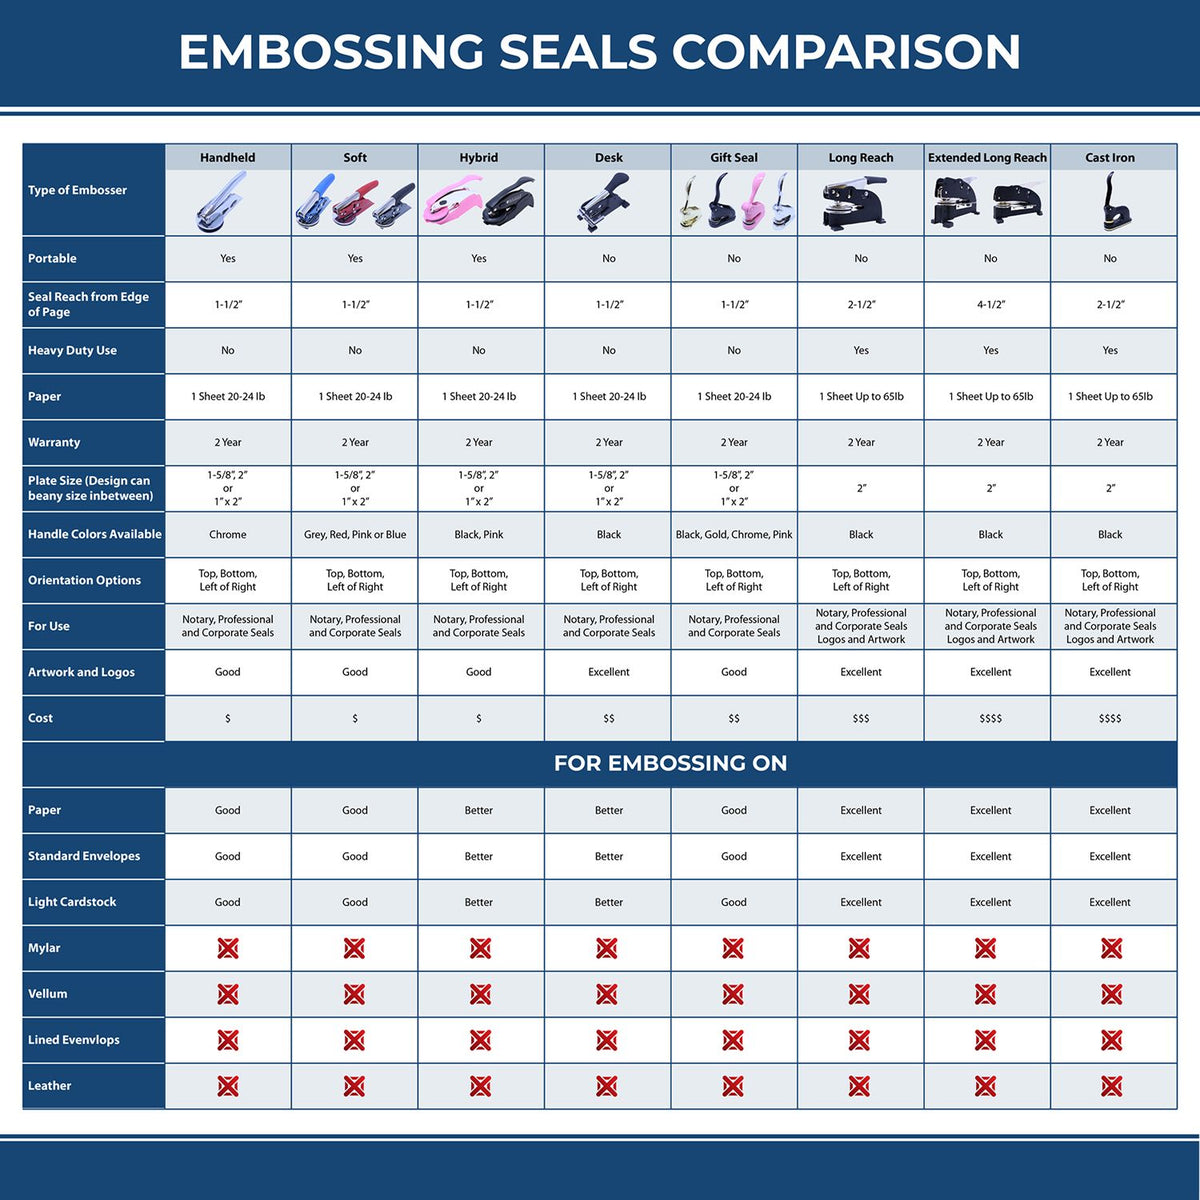 A comparison chart for the different types of mount models available for the Soft Pocket Hawaii Landscape Architect Embosser.